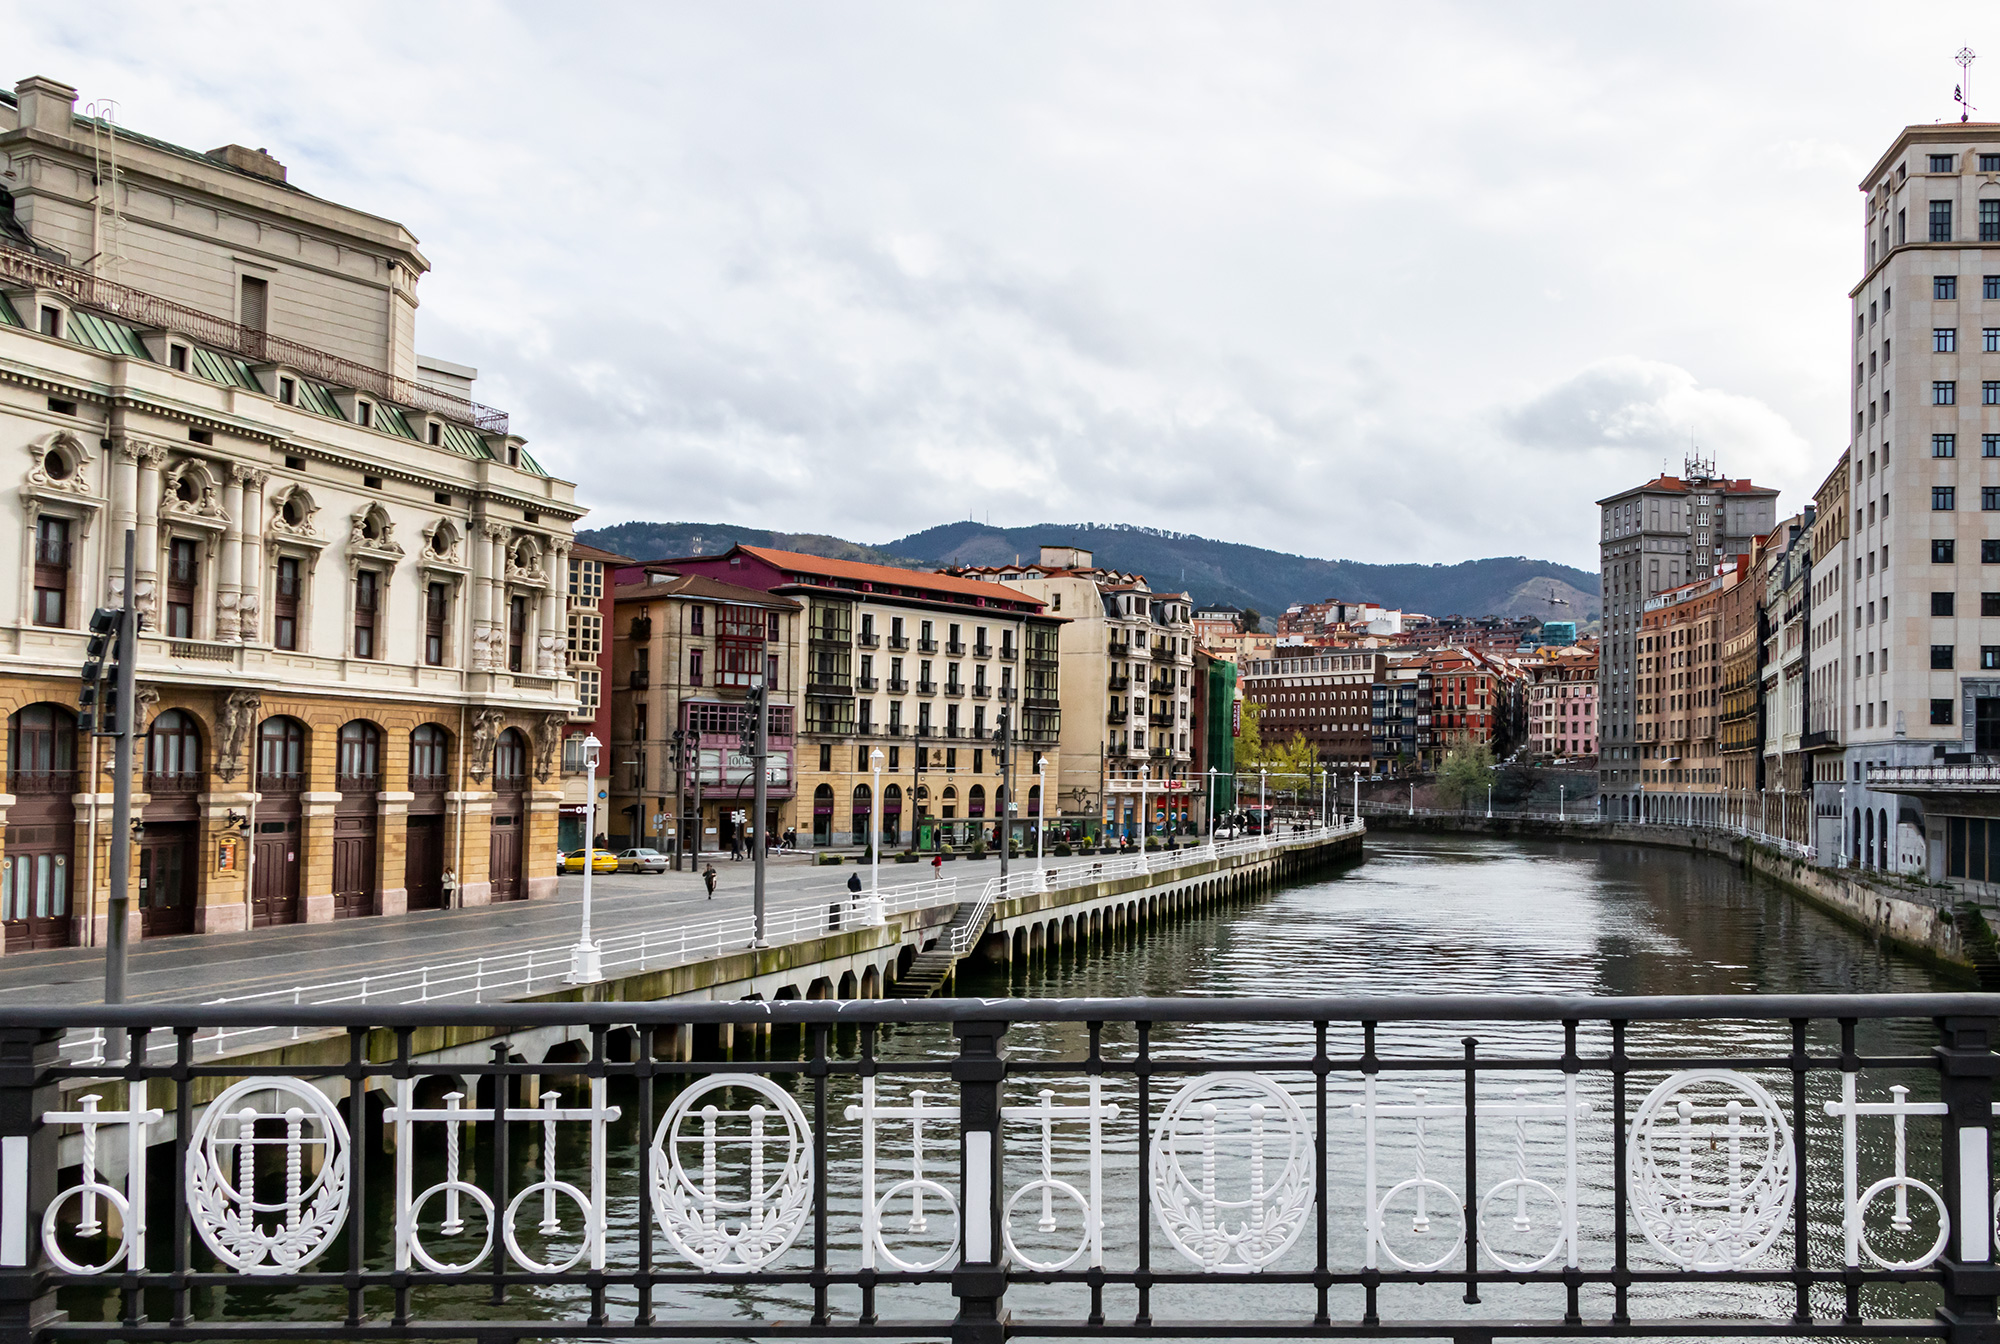 Here are the best things to do in Bilbao - Enjoy the view from the Arenal Bridge